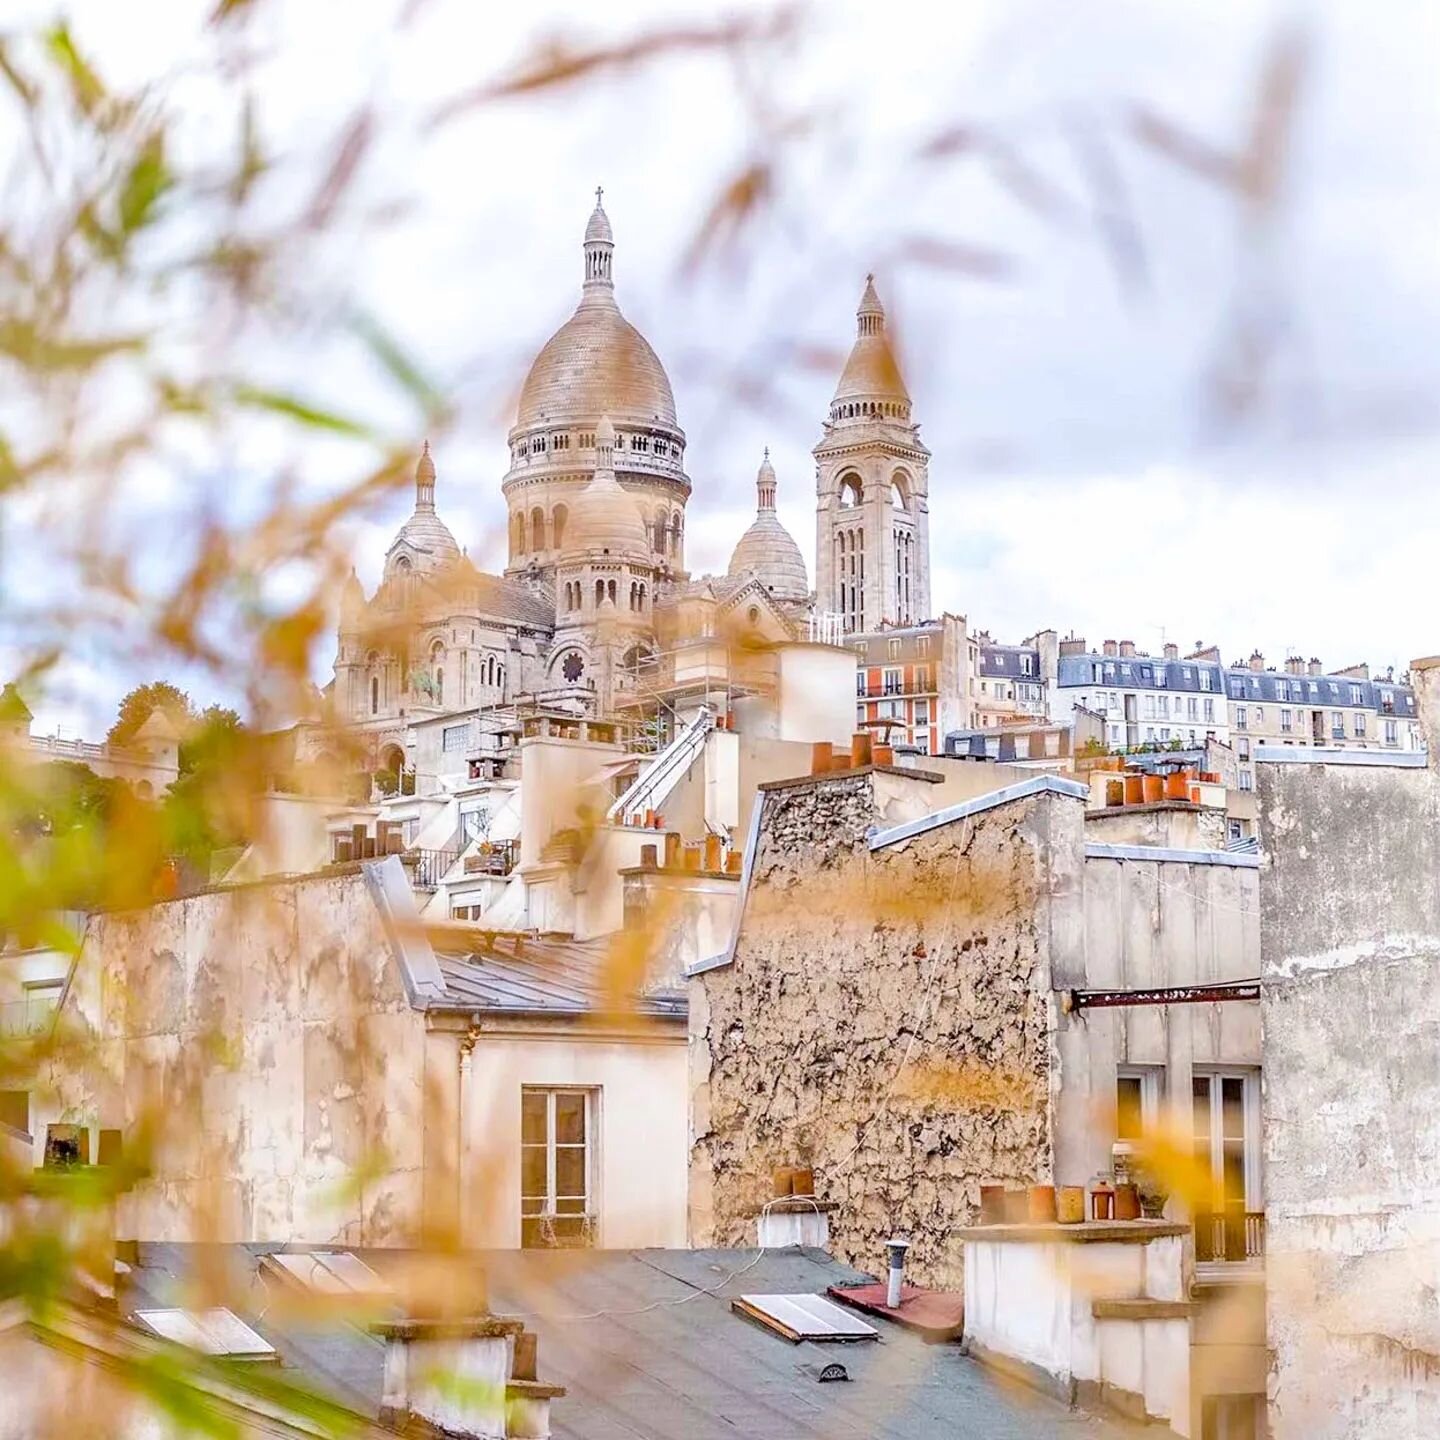 5 reasons to visit Montmartre when traveling to Paris

Many people often ask me what&rsquo;s my favorite location in Paris. I tell them, there&rsquo;s many 
places to see and that I love but each neighborhood has its own charm and specificity 
so 